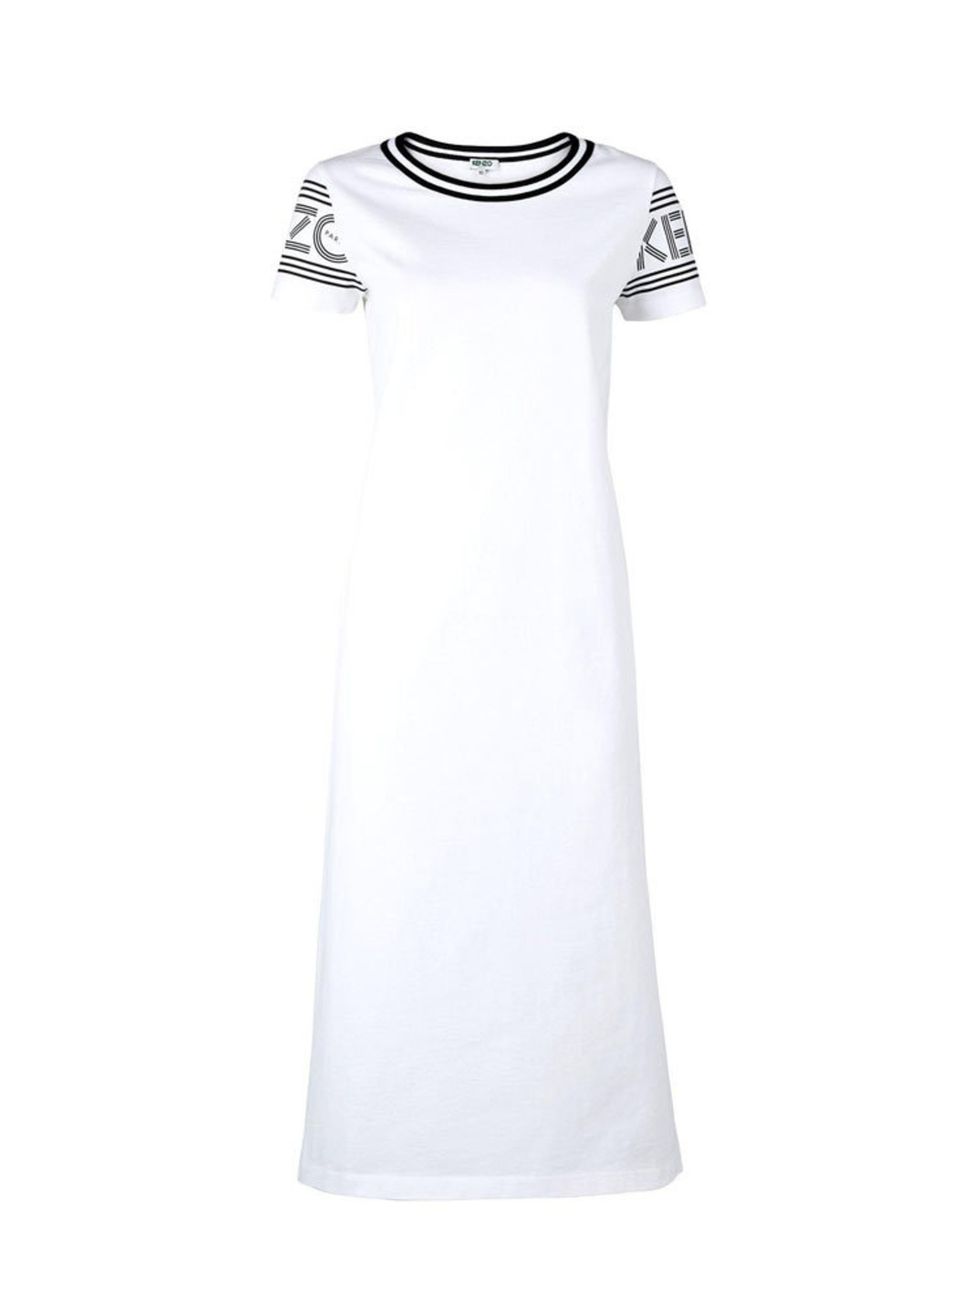 <p>Kenzo T-Shirt Dress, £140 at <a href="http://www.veryexclusive.co.uk/kenzo-slogan-arm-t-shirt-dress-white/1600041145.prd" target="_blank">veryexclusive.co.uk</a></p>

<p>Day: Pair with an oversized open <a href="http://www.veryexclusive.co.uk/won-hundr